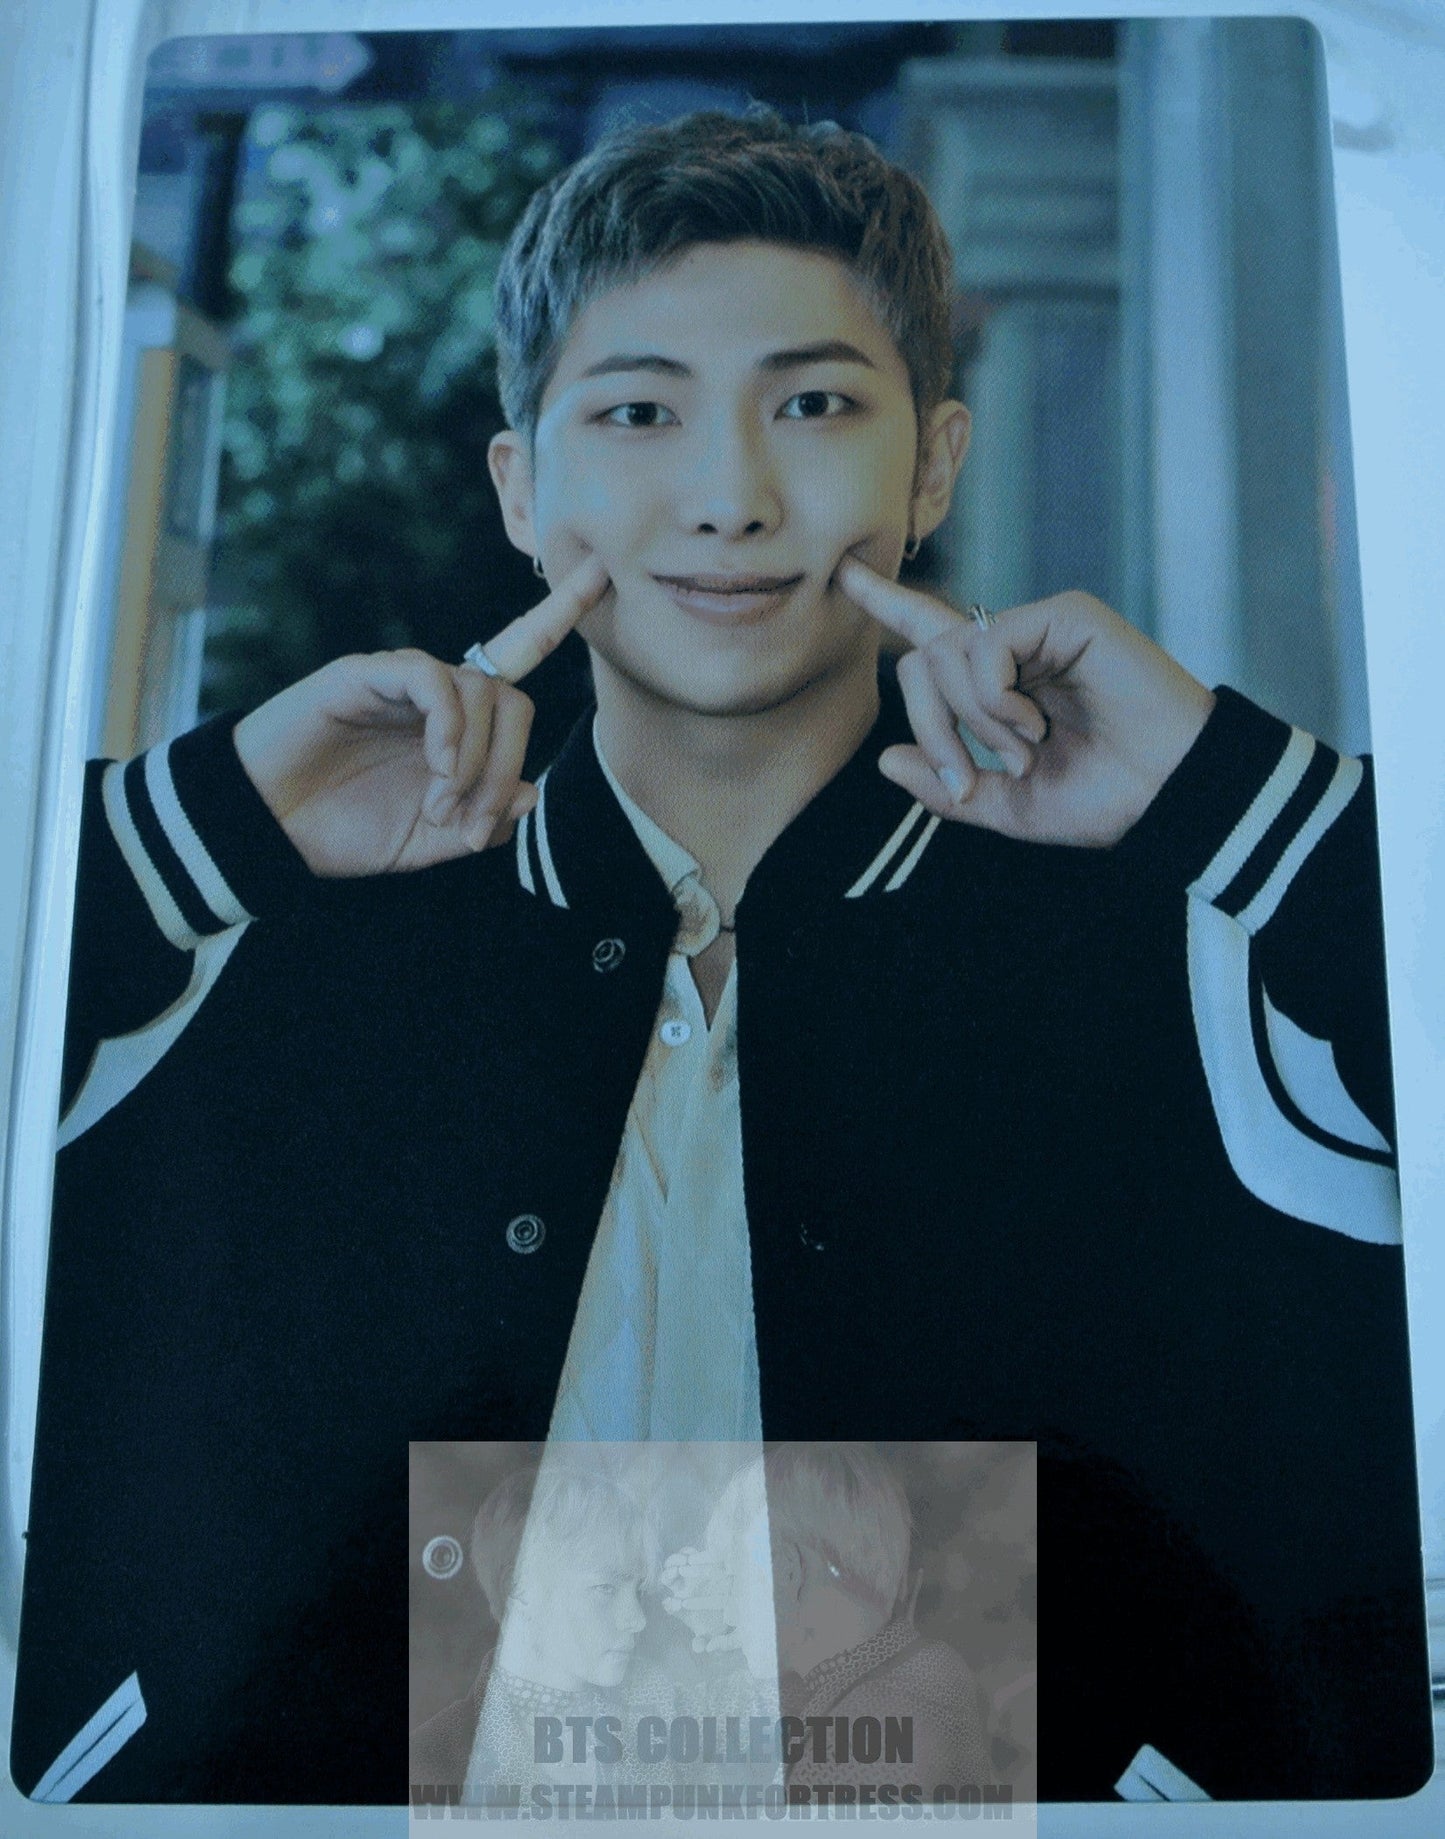 BTS RM KIM NAMJOON NAM-JOON 2022 PERMISSION TO DANCE ON STAGE SEOUL PTD #2 OF 4 PHOTOCARD PHOTO CARD NEW OFFICIAL MERCHANDISE